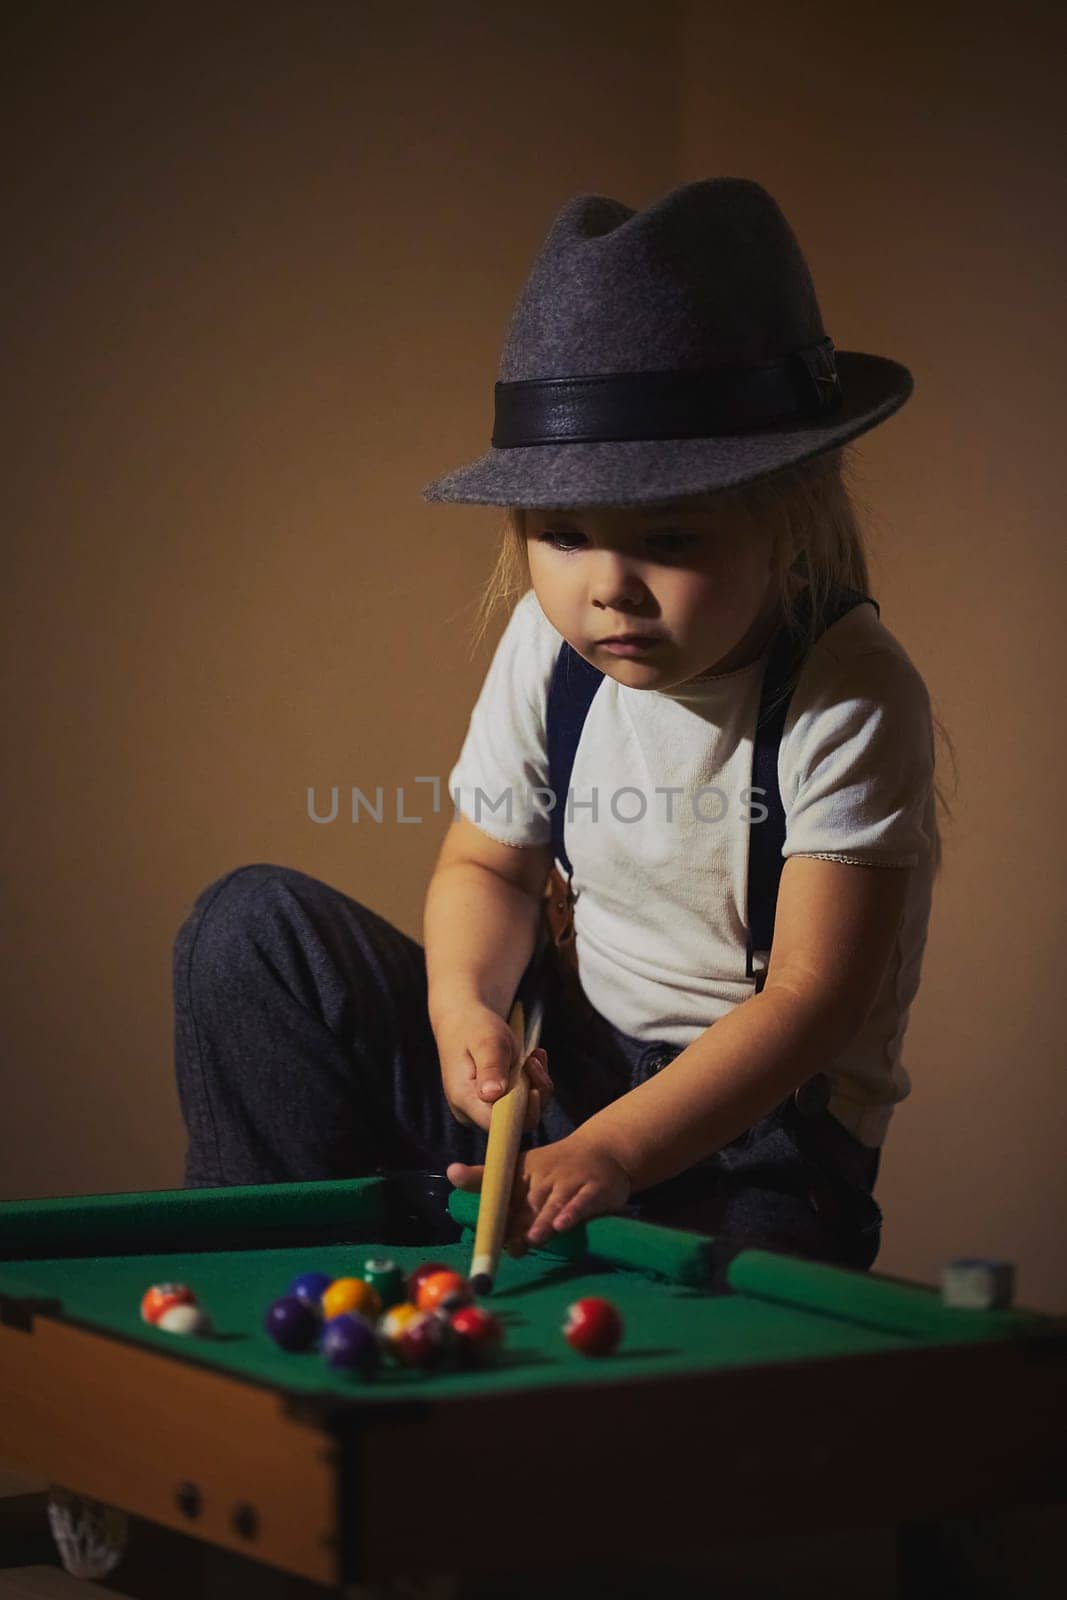 Charming child in retro clothes playing toy billiards.